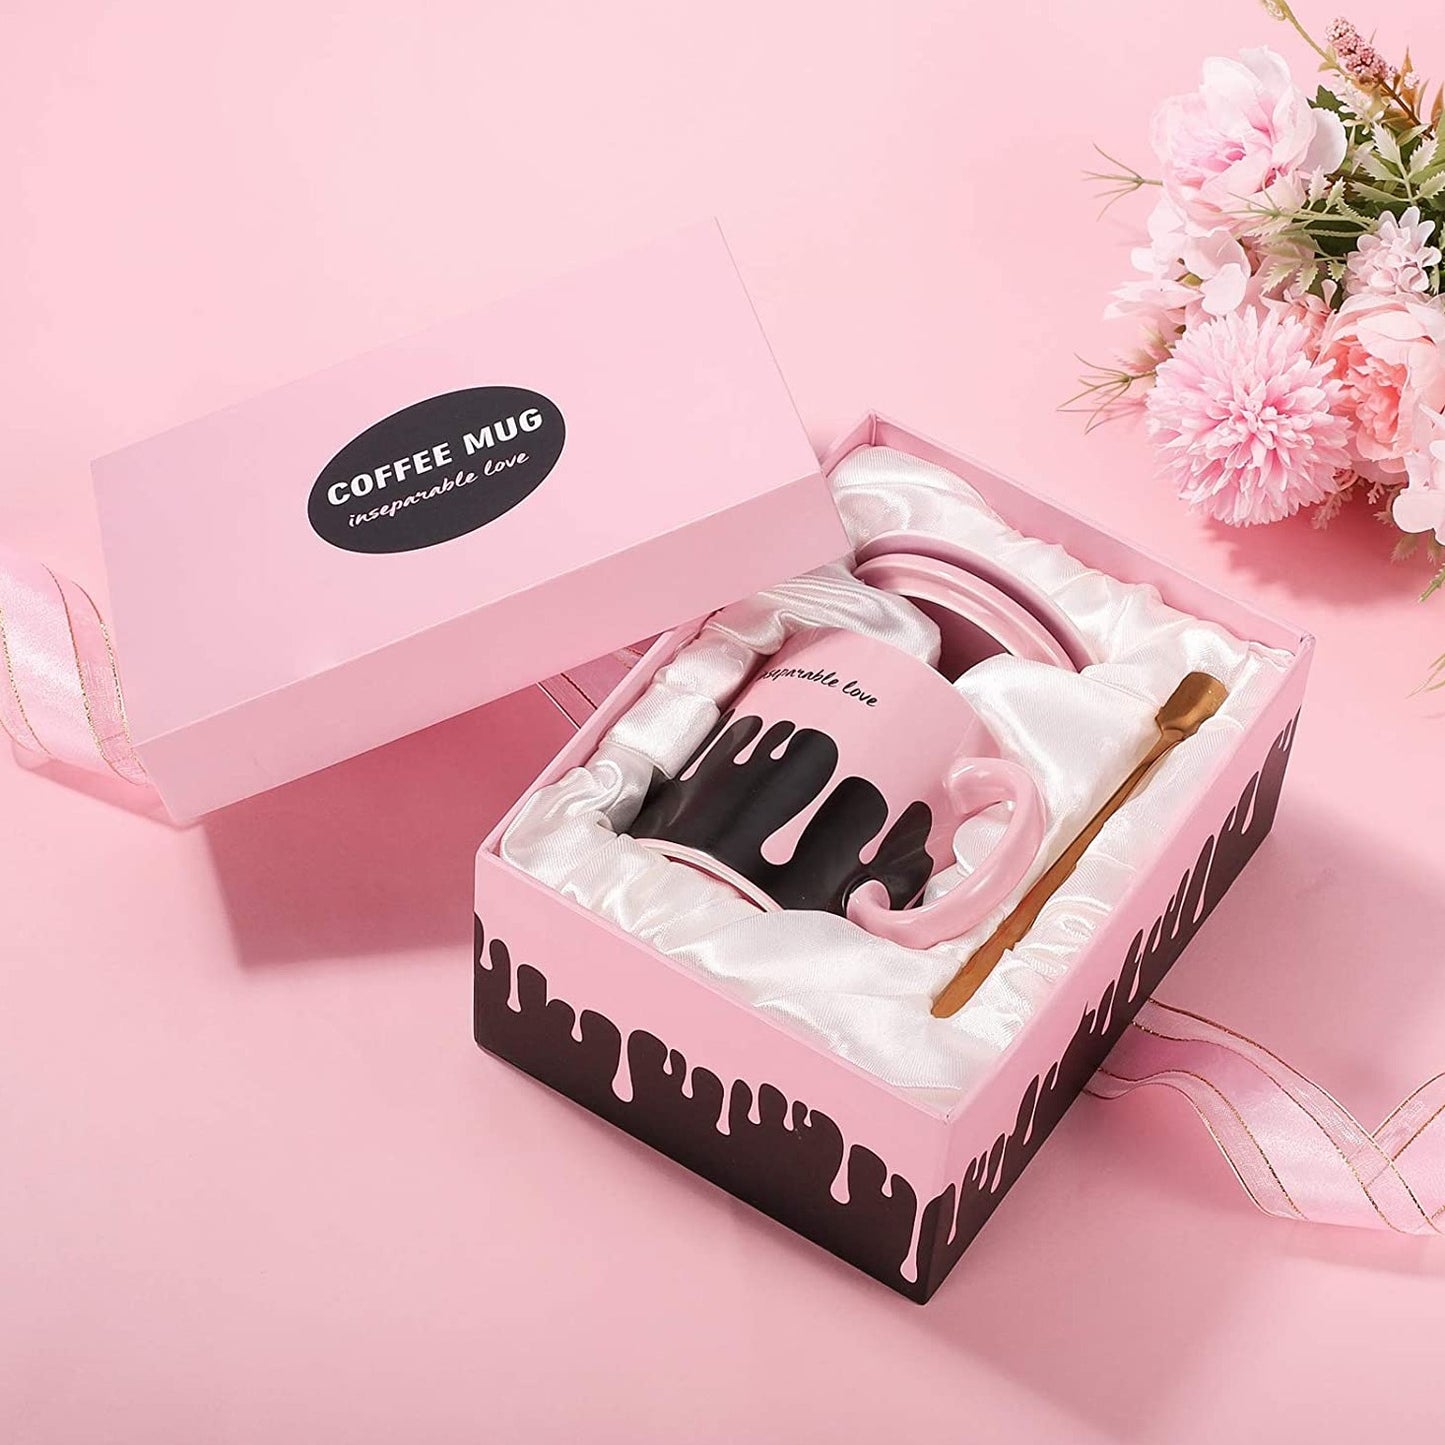 16oz inseparable love pink & black ceramic coffee cup with ceramic lid & gold spoon in a matching pink & black gift box with silk enclosure